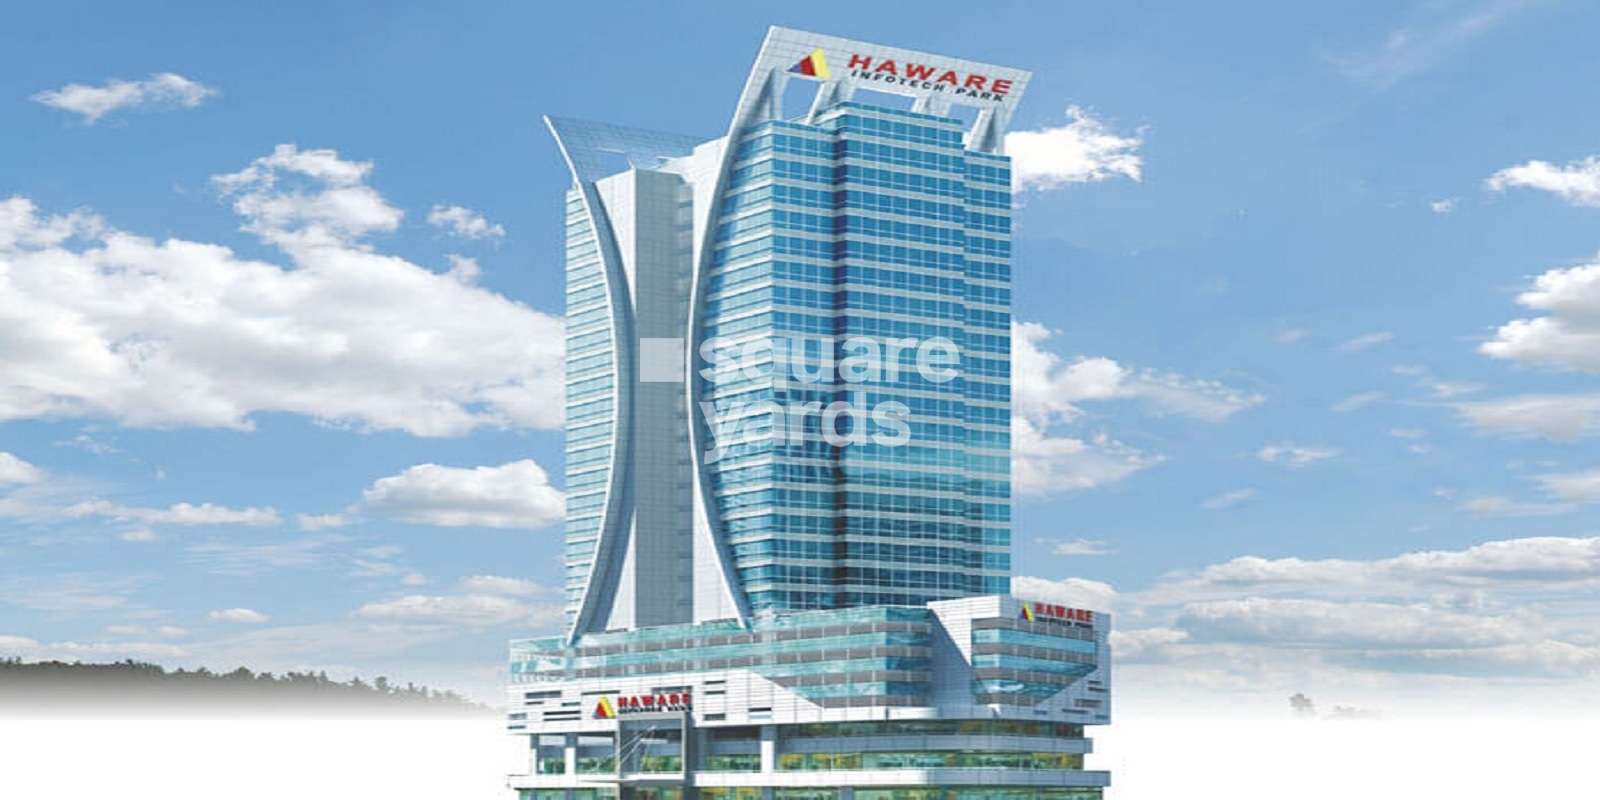 Haware Infotech Park Cover Image